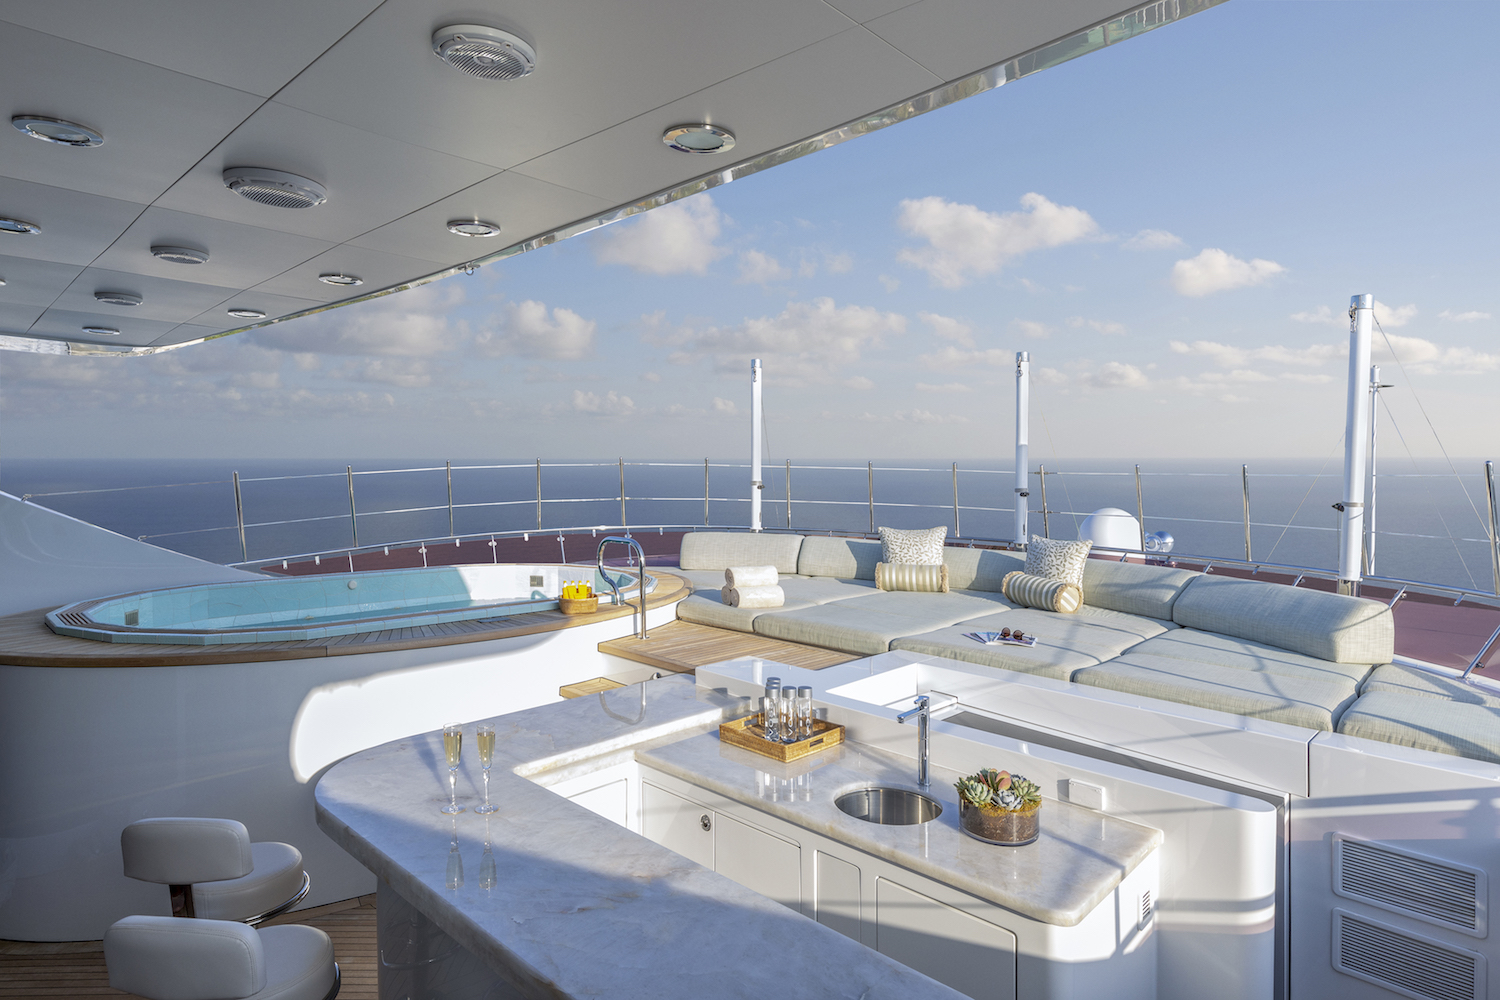 Sun Deck With Jacuzzi And Sunbathing Area